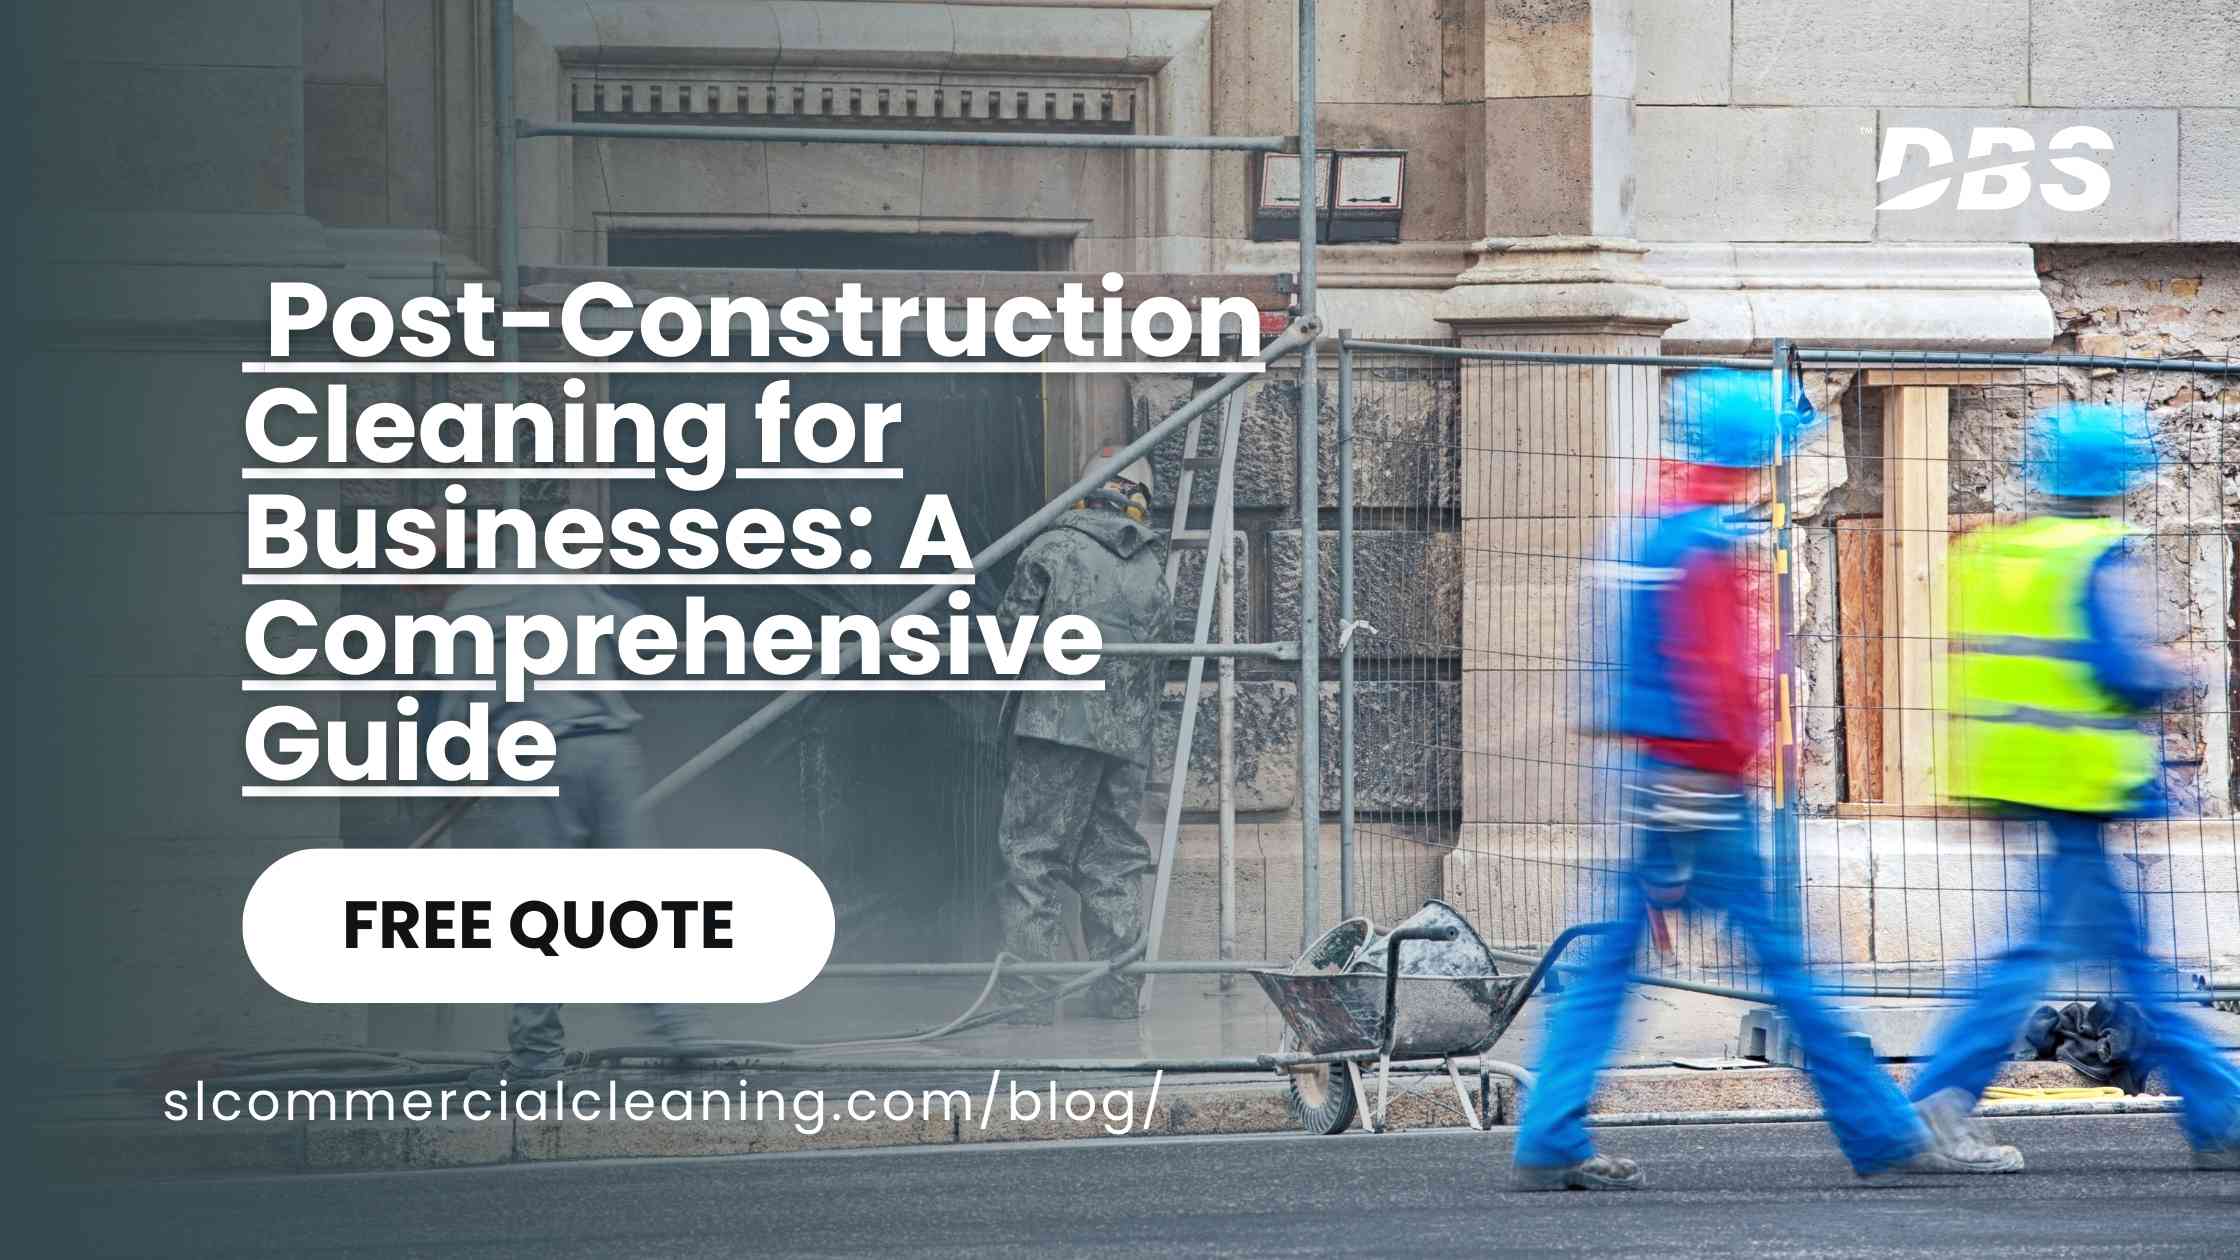 Post-Construction Cleaning for Businesses